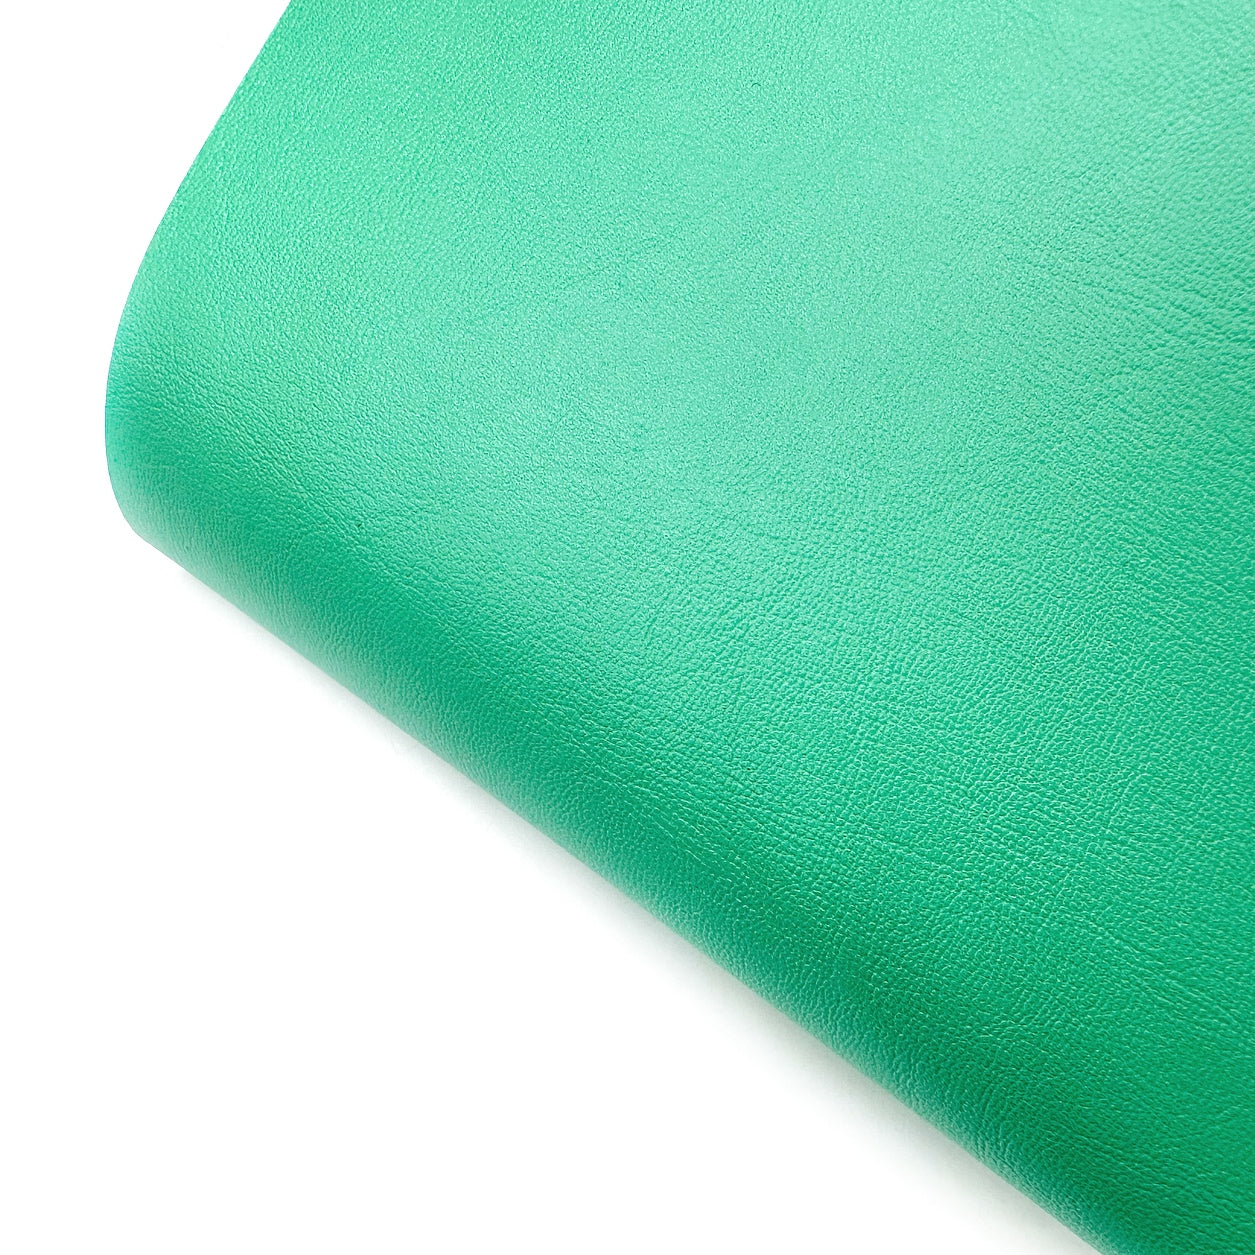 Girls Rule Green Core Colour Premium Faux Leather Fabric Sheets